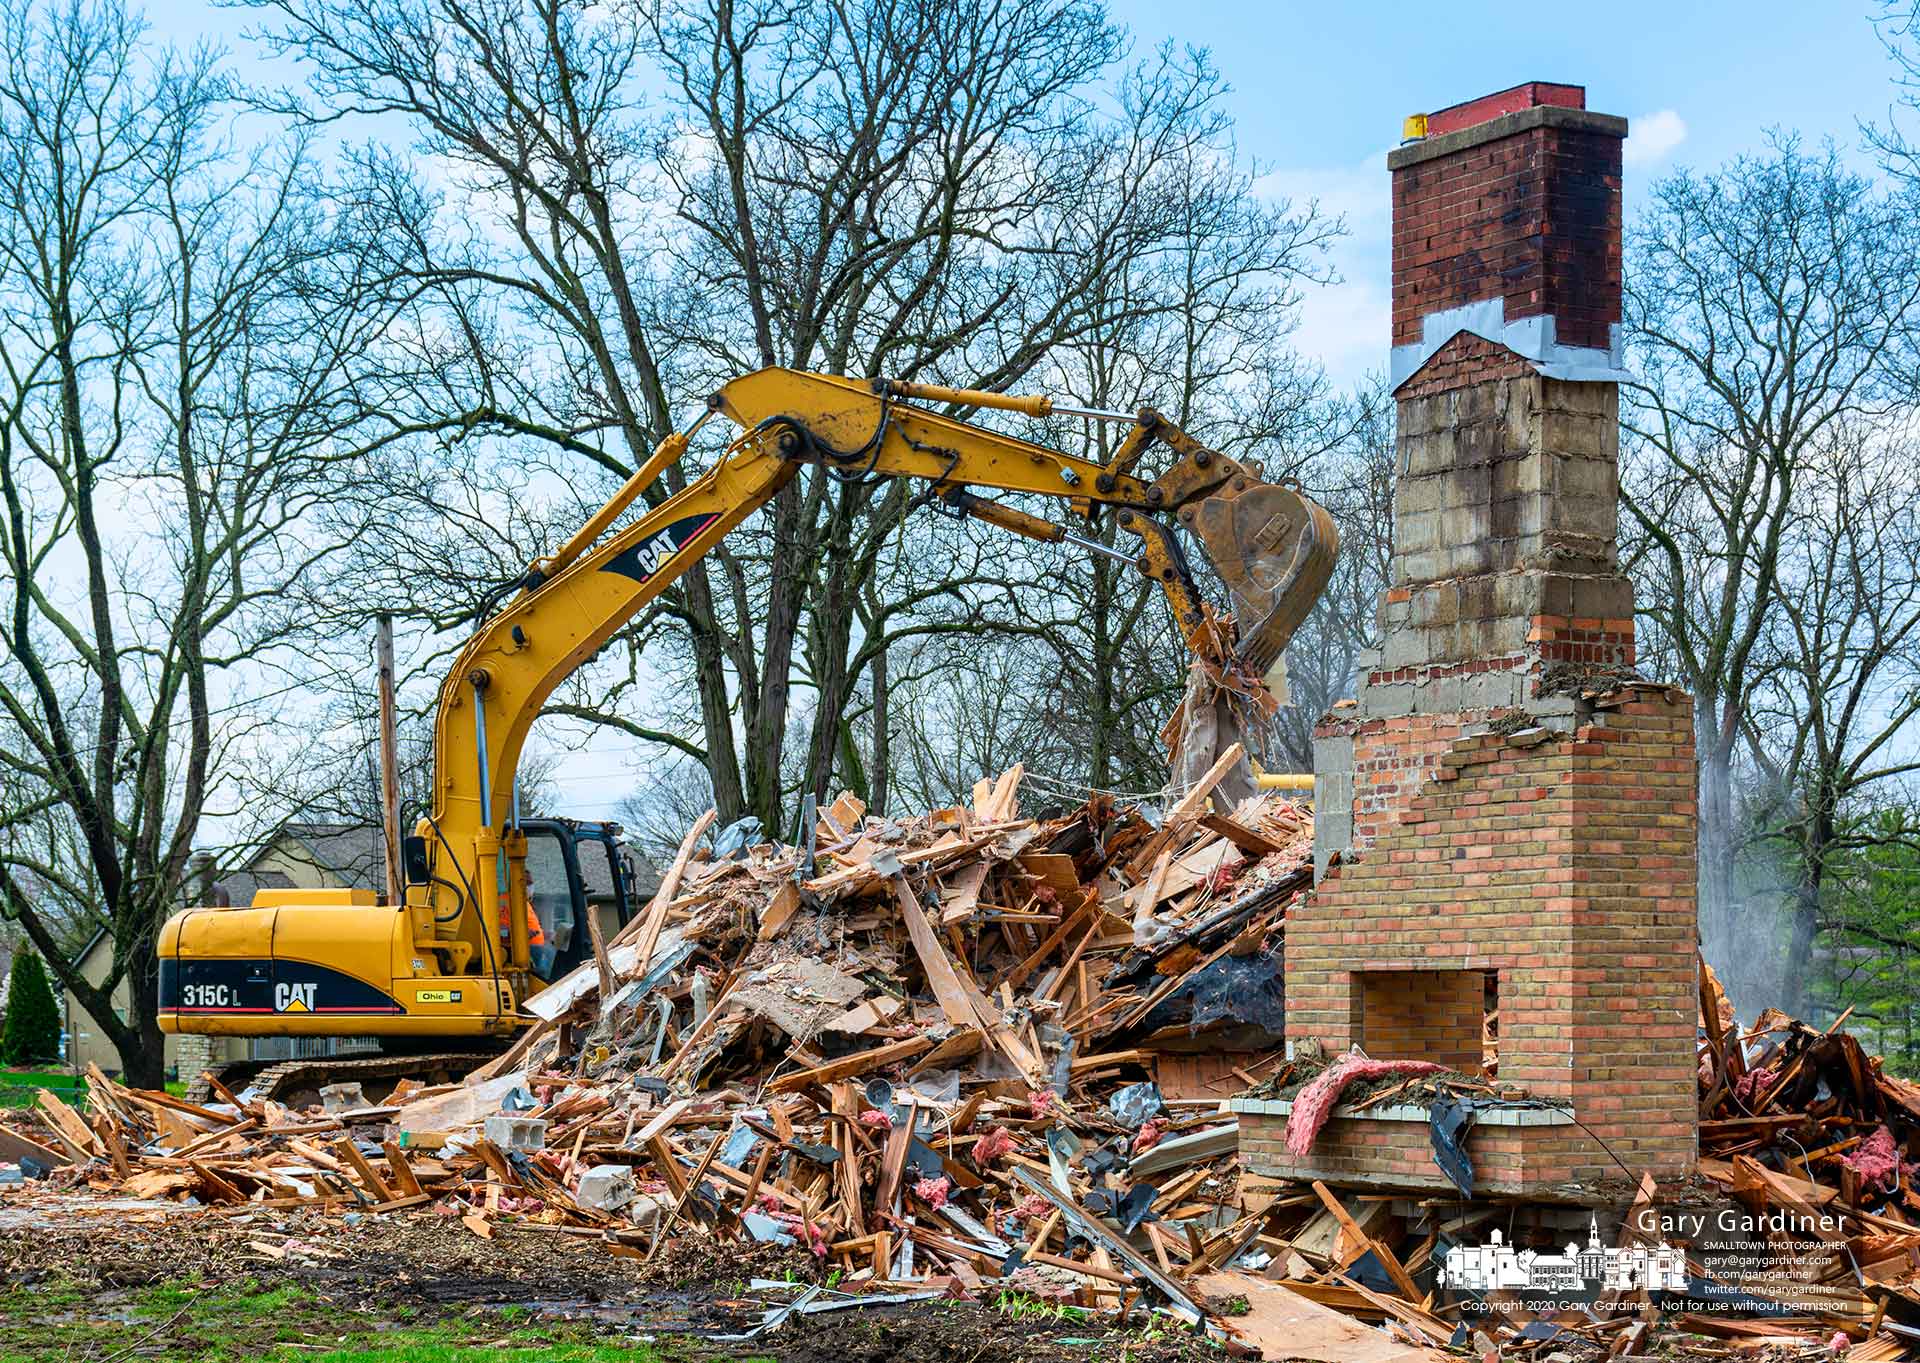 Only the chimney remains recognizable as a demolition crew removes the McVay home from its location on Hempstead Road where Westerville will build a new park. My Final Photo for April 7, 2020.